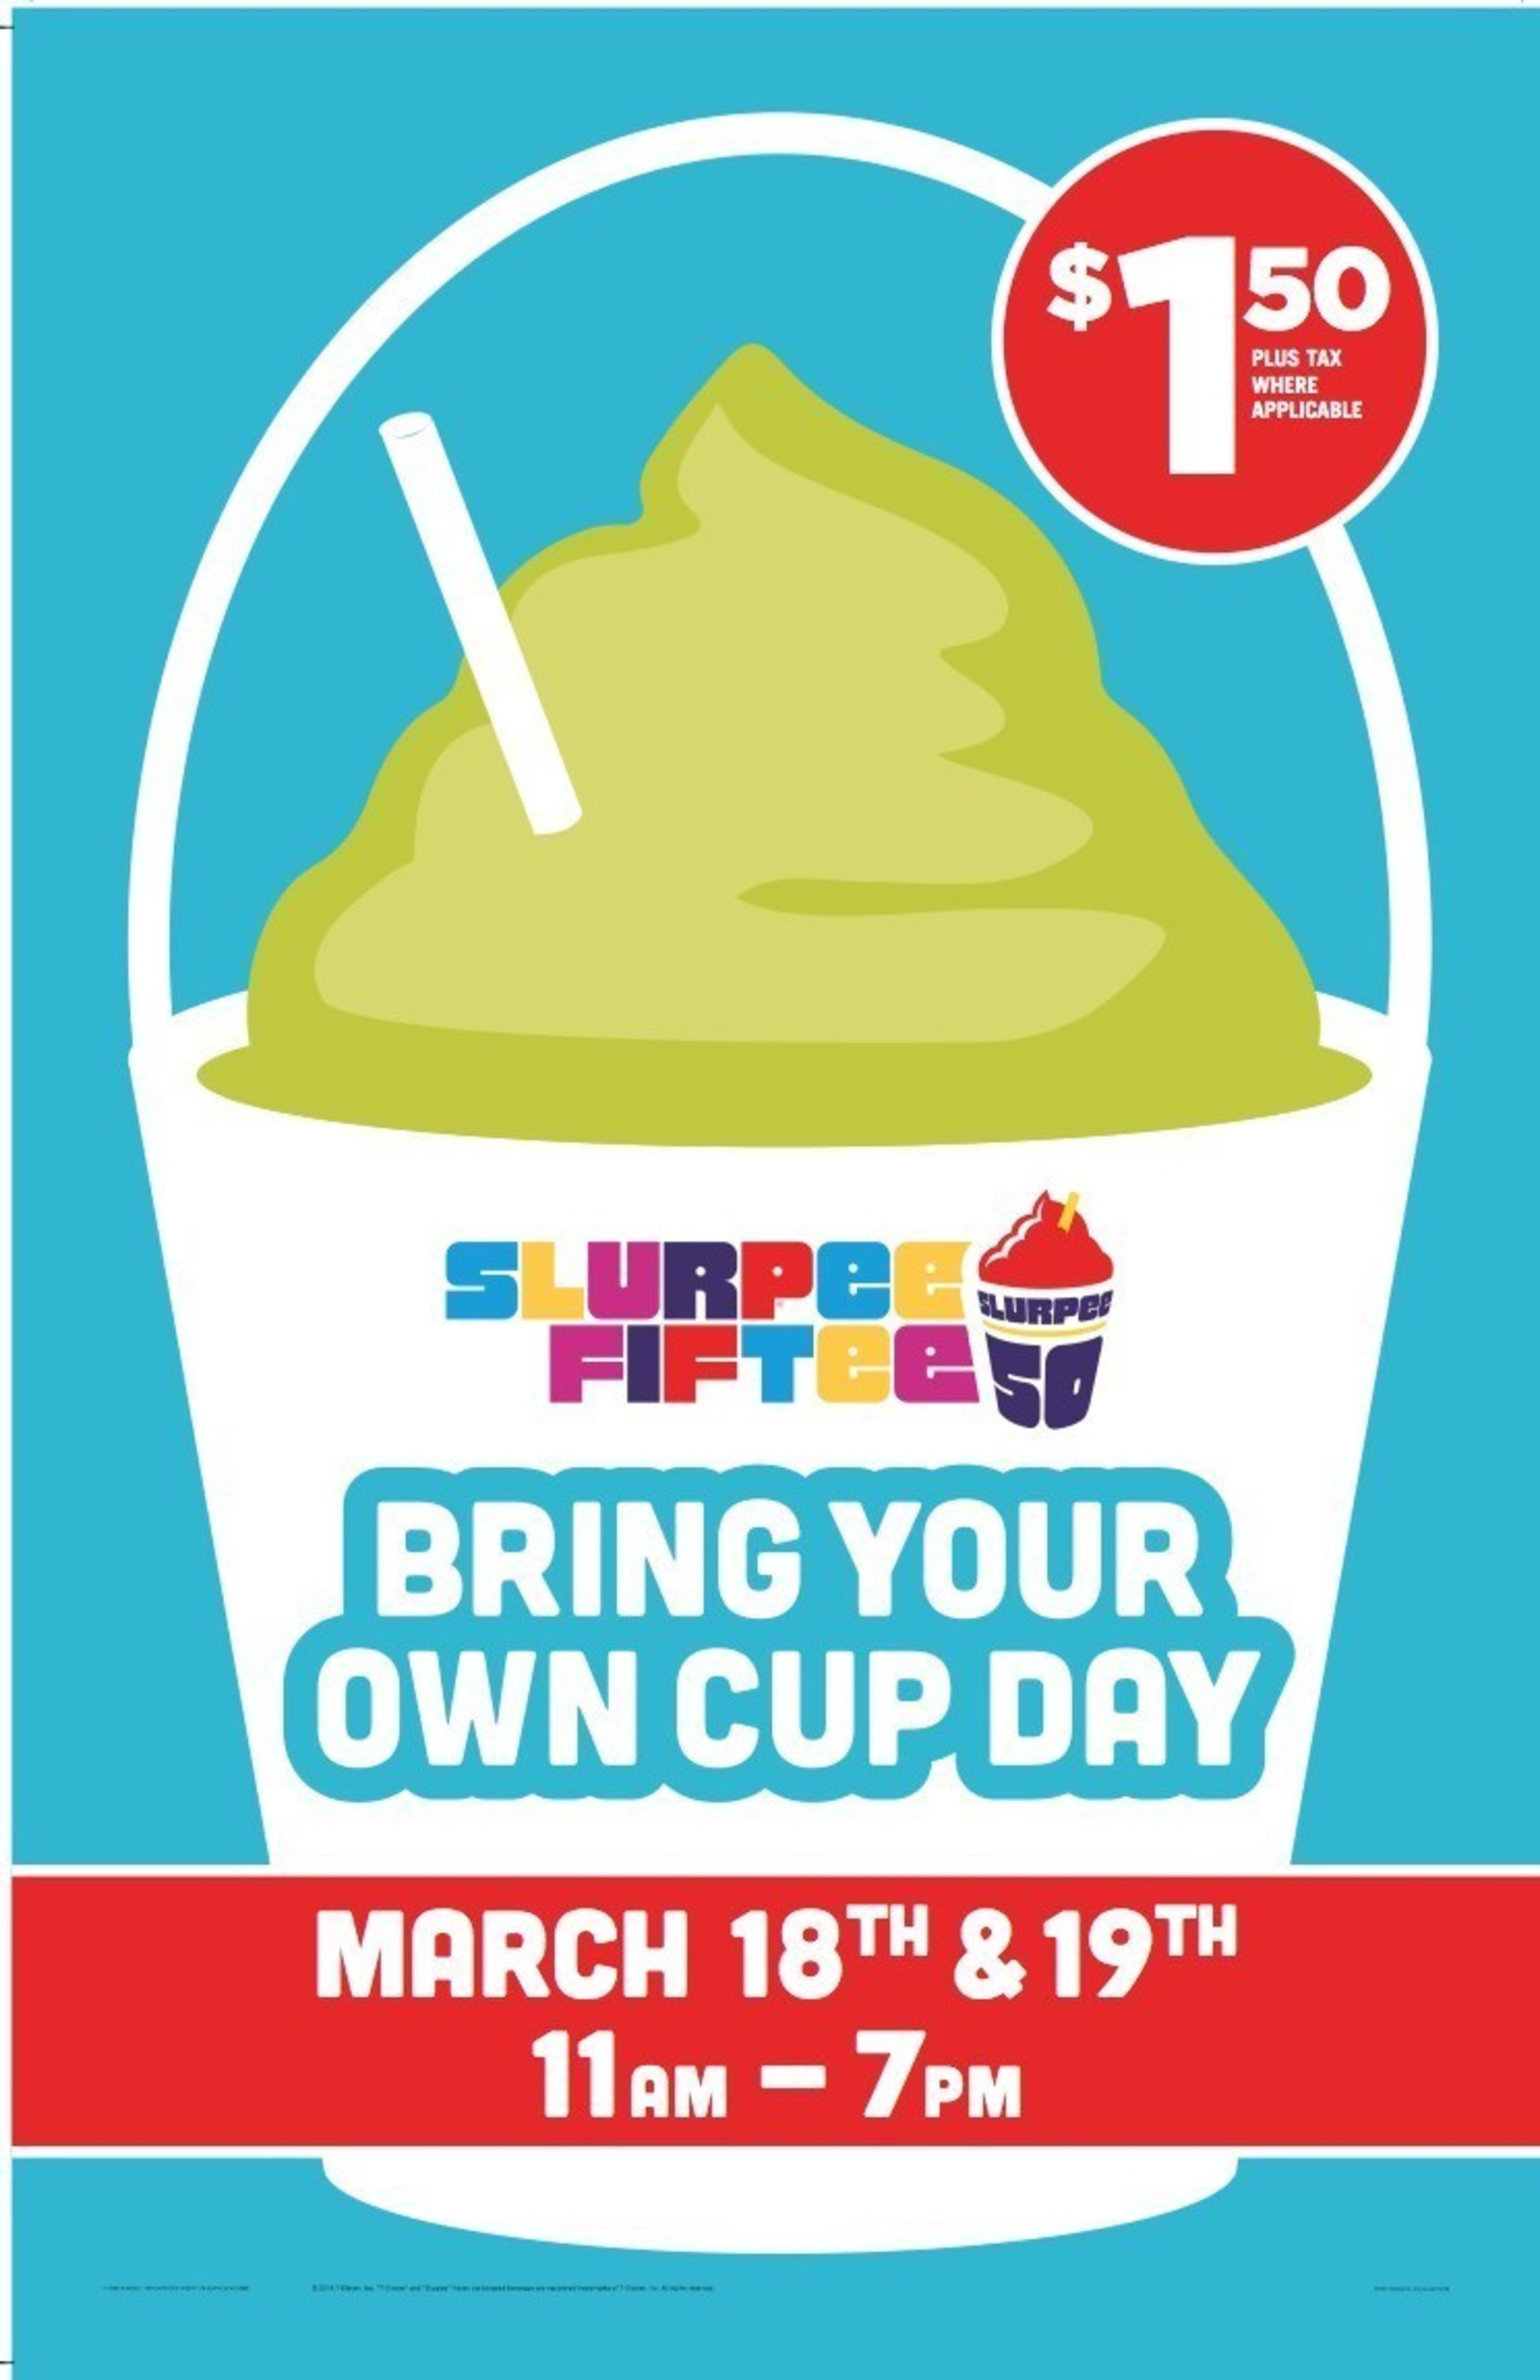 7-Eleven(R) Bring Your Own Cup (#BYOCupDay), when fans can bring just about anything resembling a cup to fill it with a Slurpee(R) drink is Friday, March 18, and Saturday, March 19.